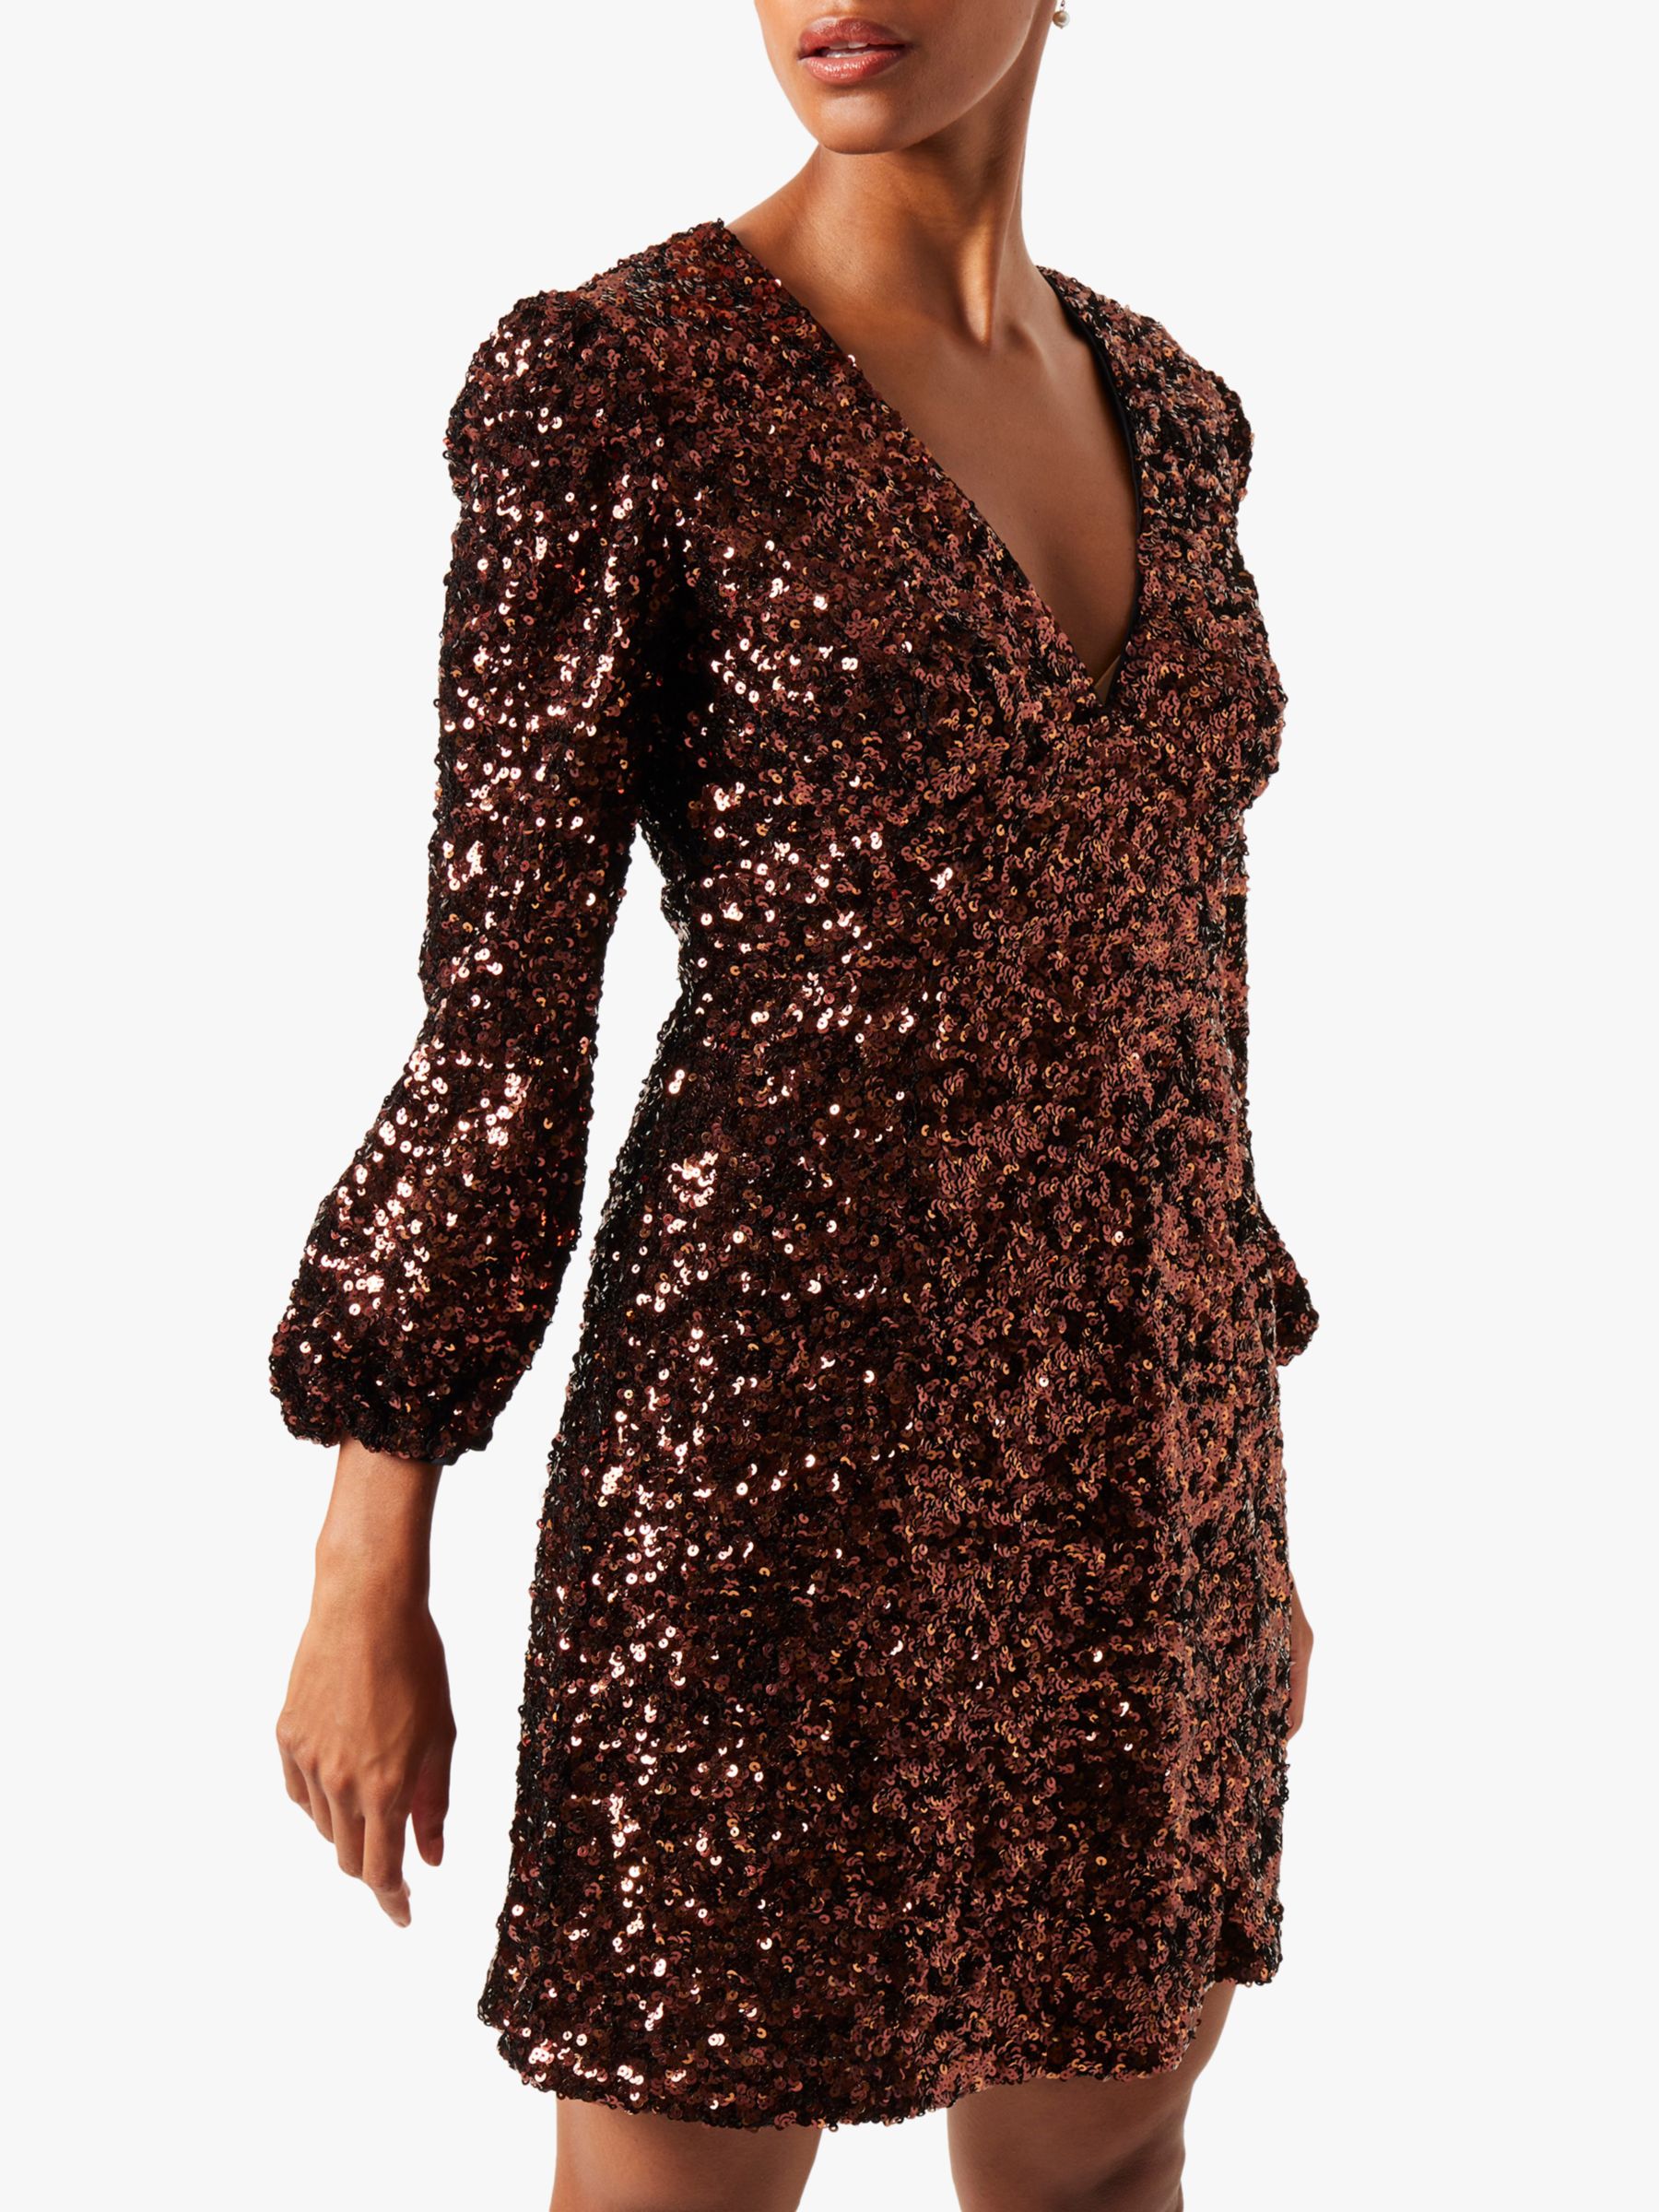 French Connection Eeka Sequin Mini Dress, Bitter Chocolate